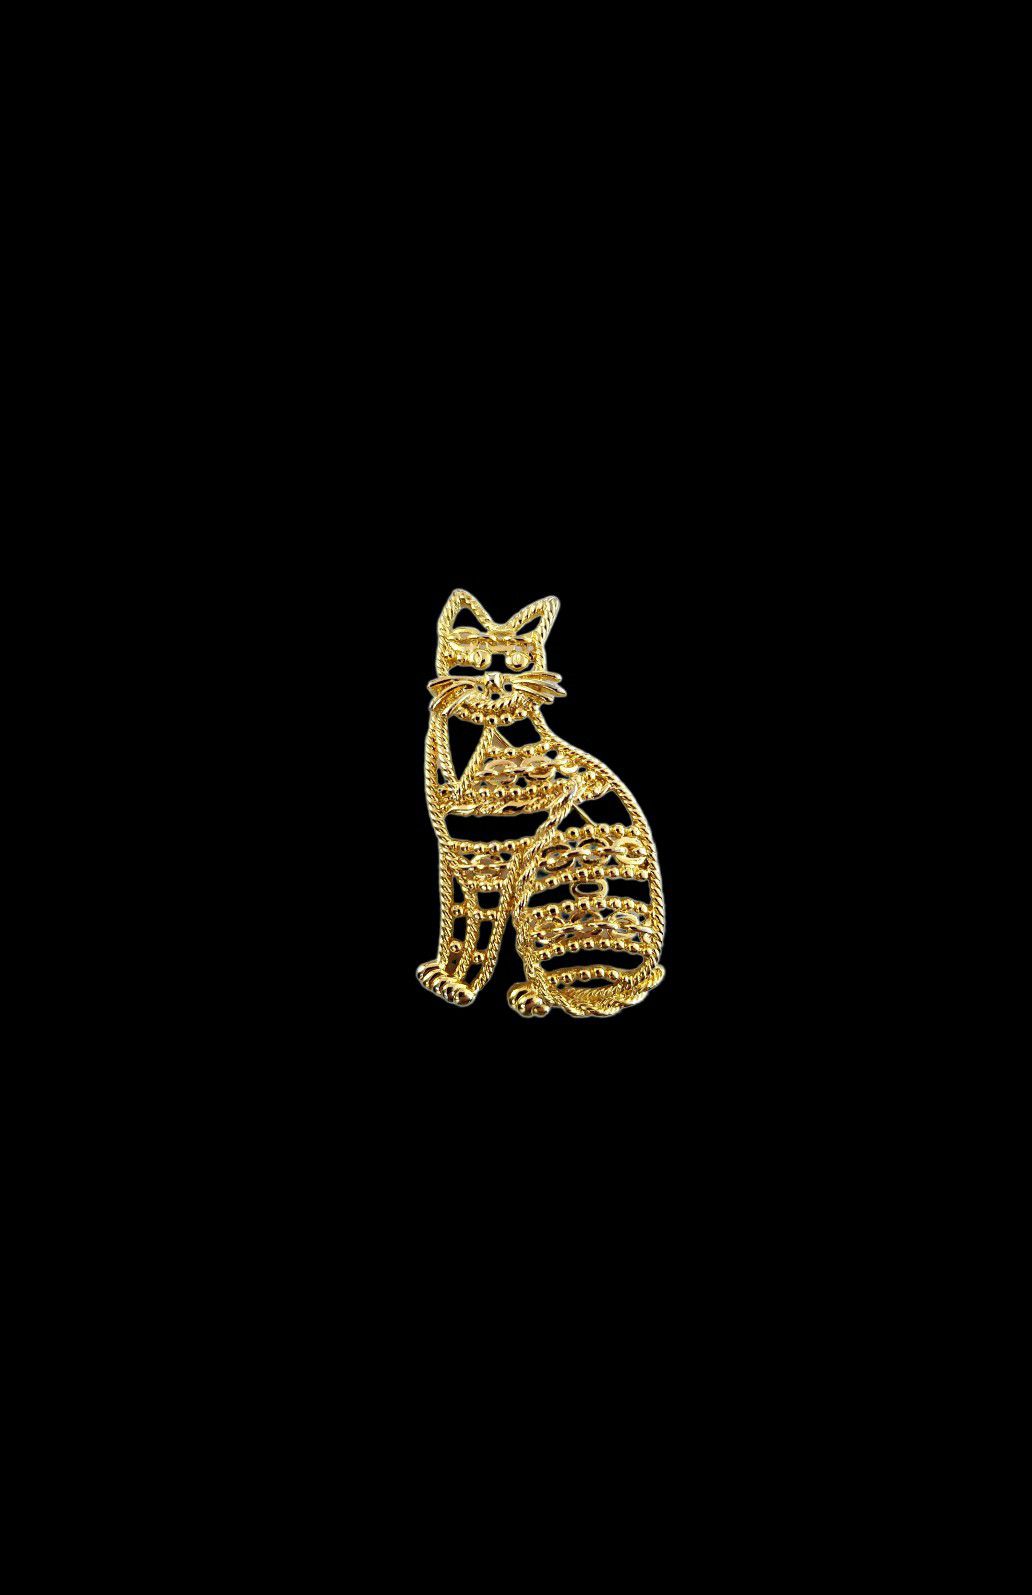 Vintage AJC Large Gold Tone Cat Brooch Pin Signed Kitty Twisted Metals Chain Ornate